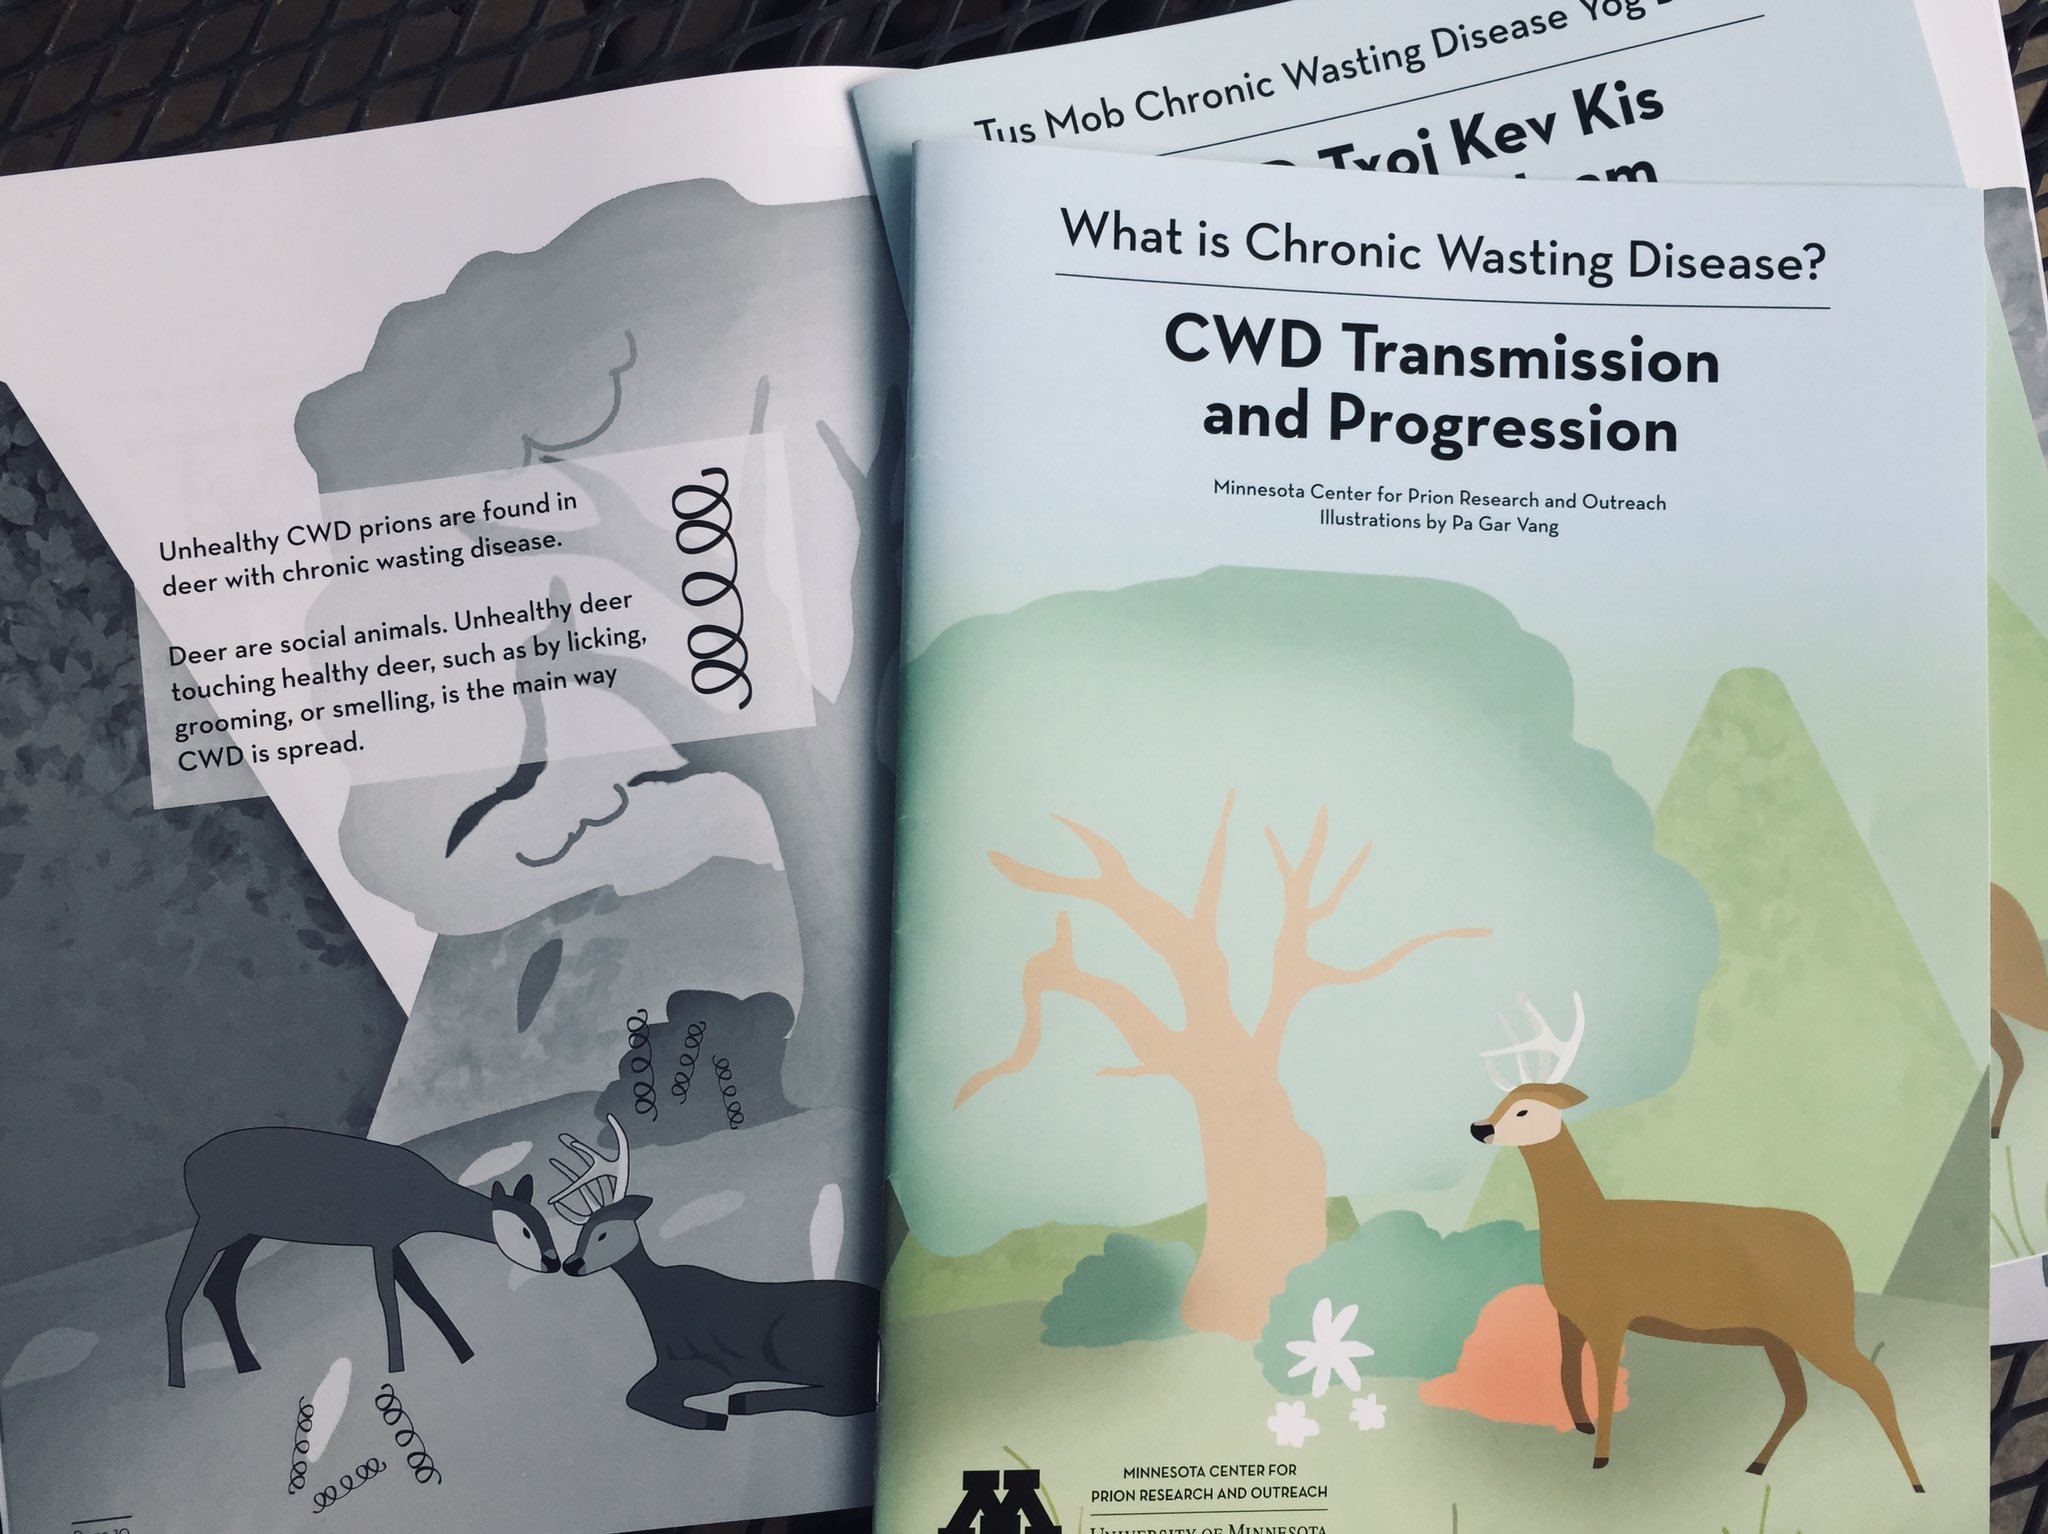 Copies of the chronic wasting disease booklets laid out on a table